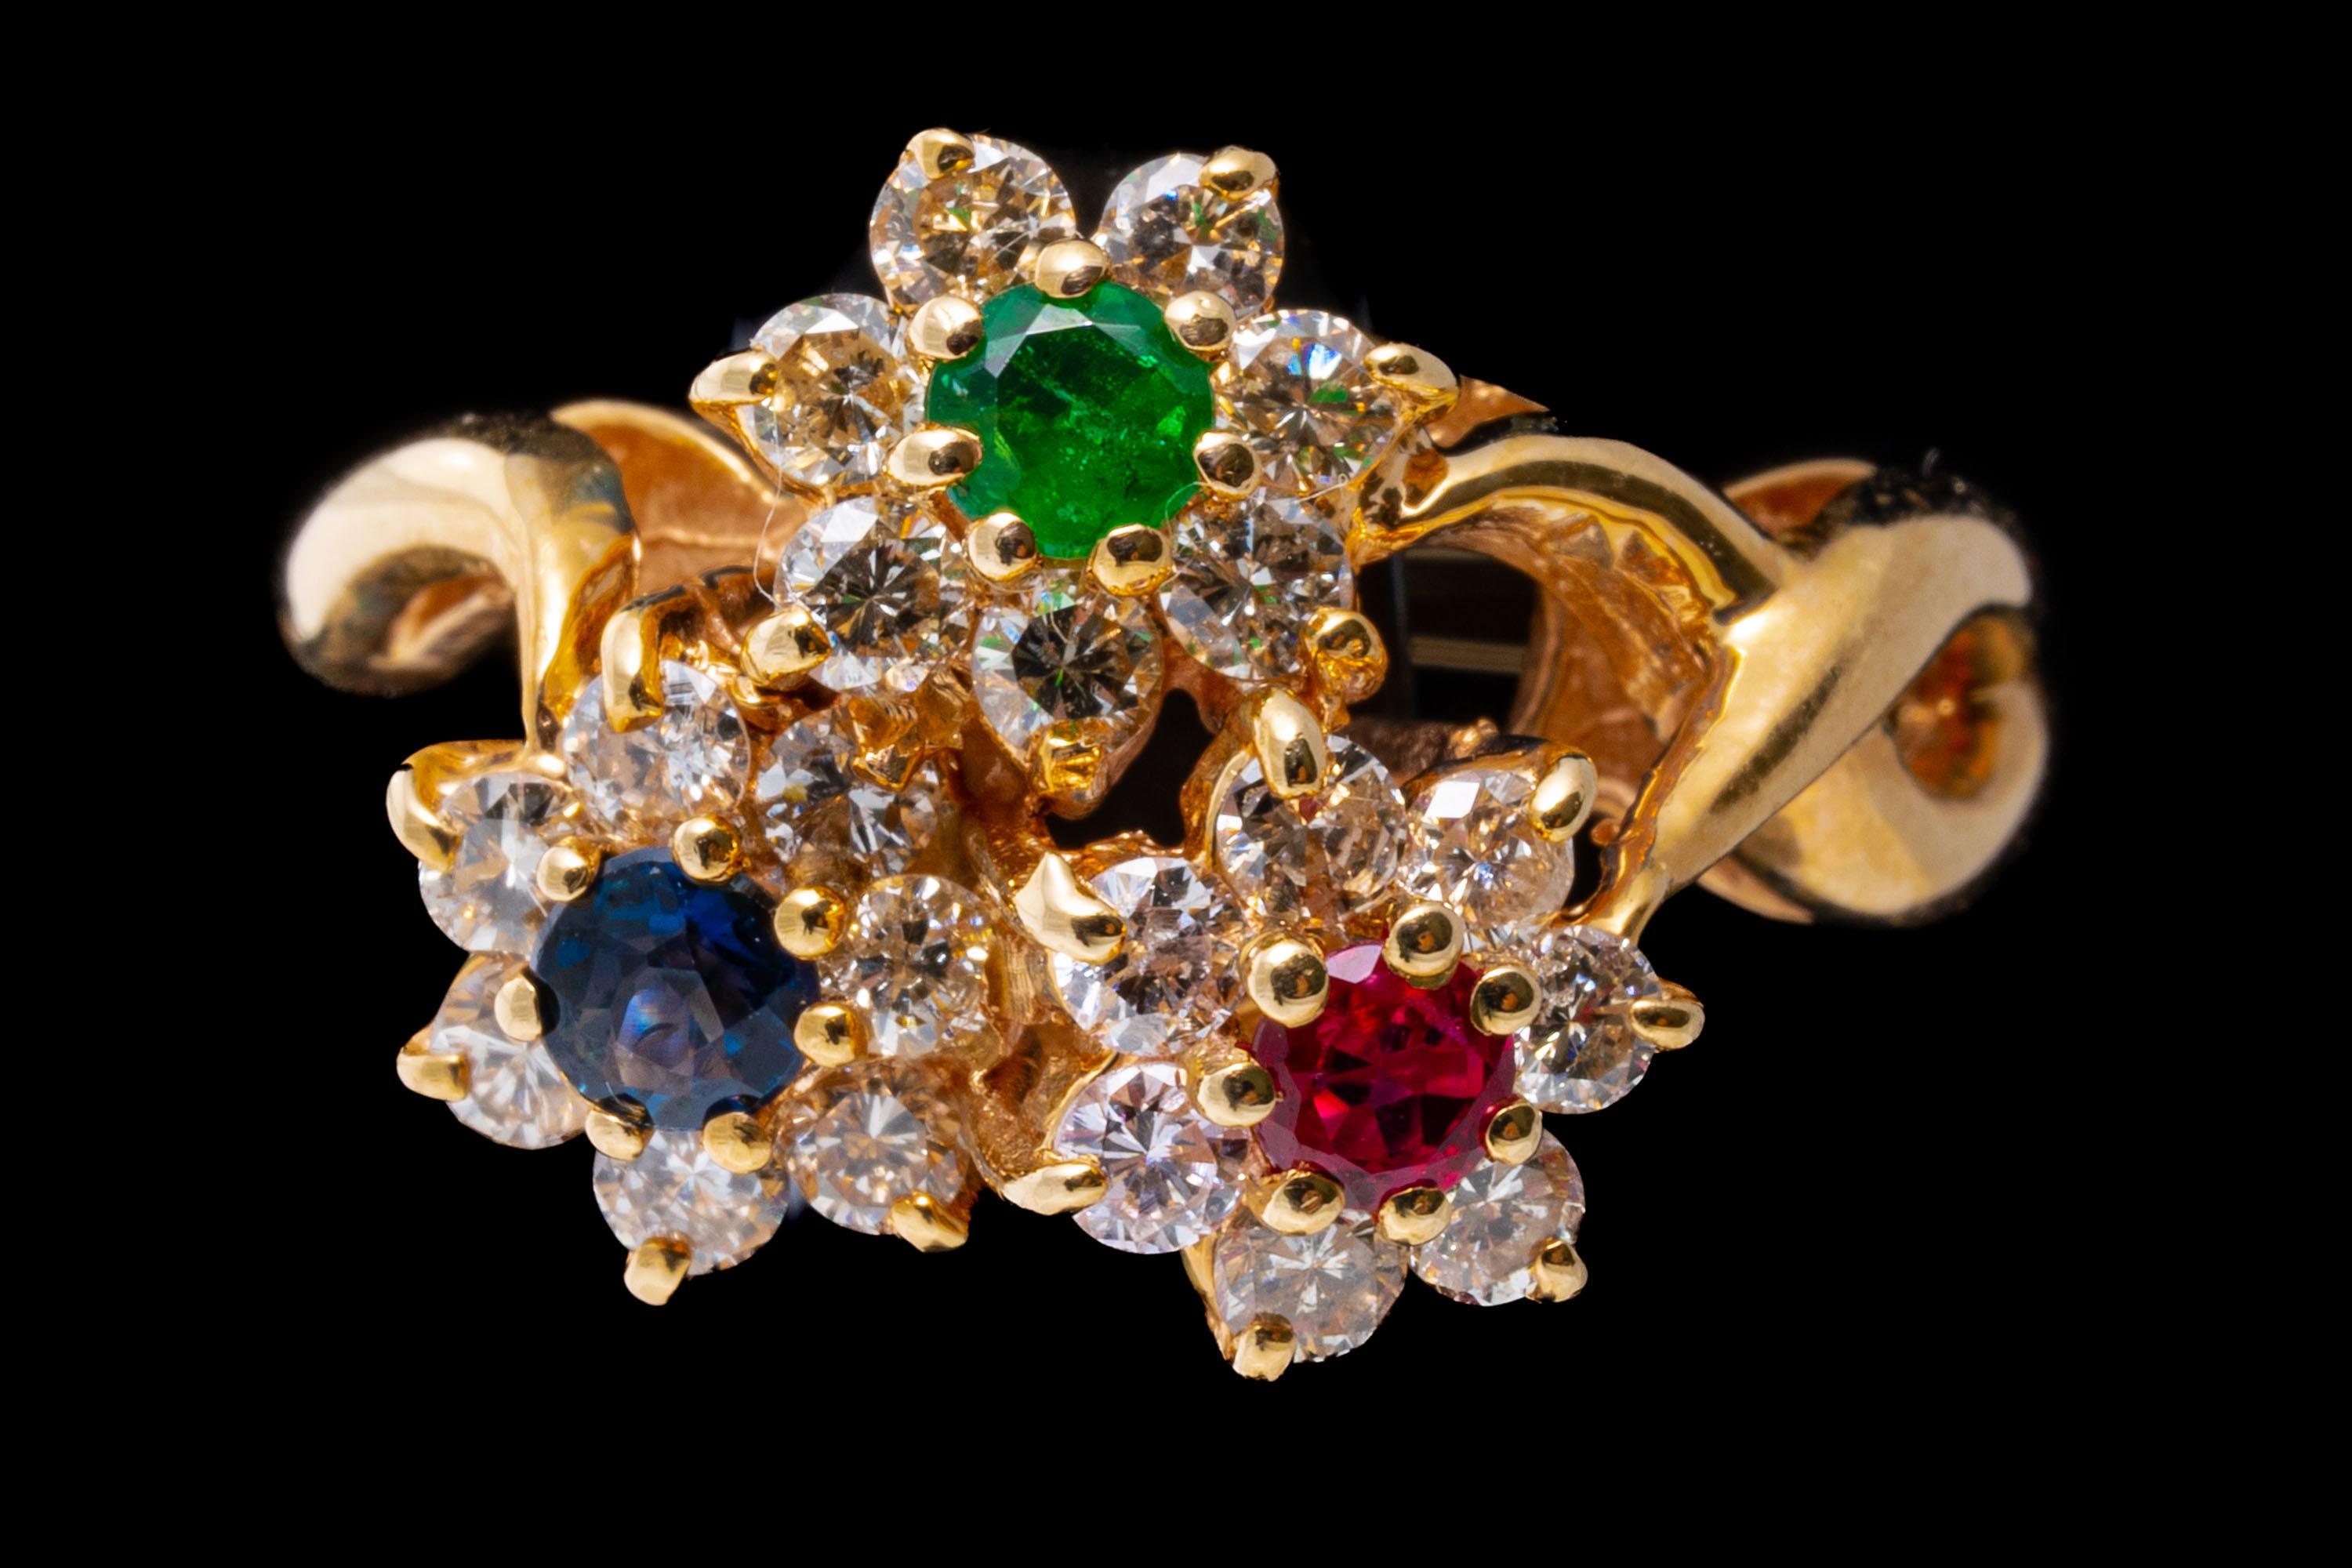 14k yellow gold ring. This beautiful yellow gold ring is a triple flower motif, set with a round faceted red ruby (approximately 0.12 CTS), a round faceted green emerald (approximately 0.10 CTS) and a round faceted blue sapphire (approximately 0.12